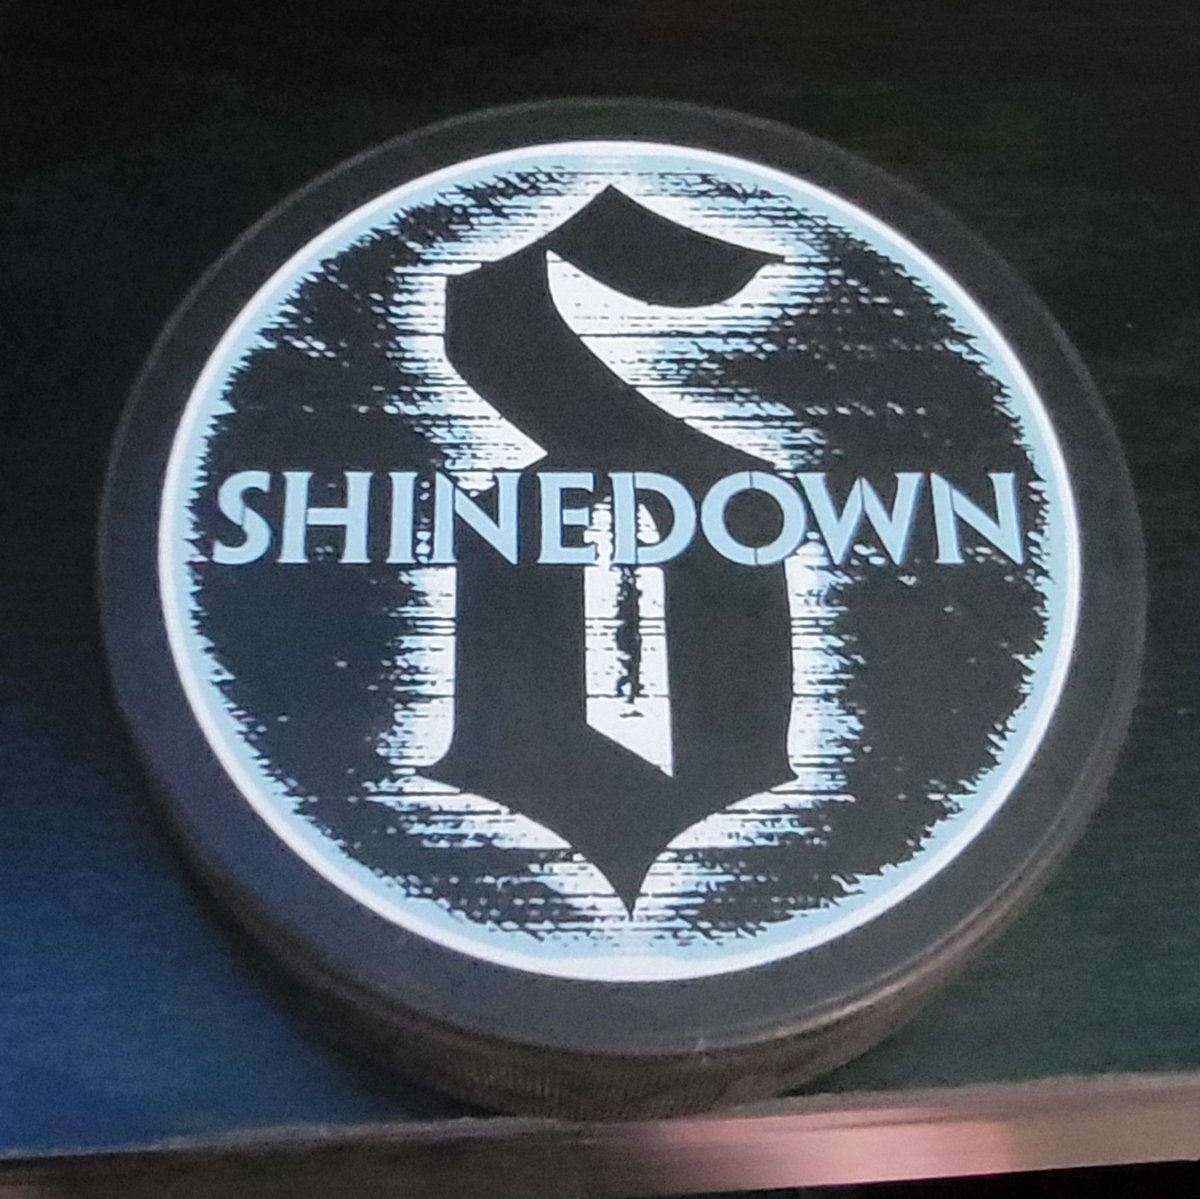 As an avid puck collector this was absolutely perfect for my collection! Never thought my favorite band would have a hockey puck 😂 @Shinedown @ZMyersOfficial @PUCKHCKY